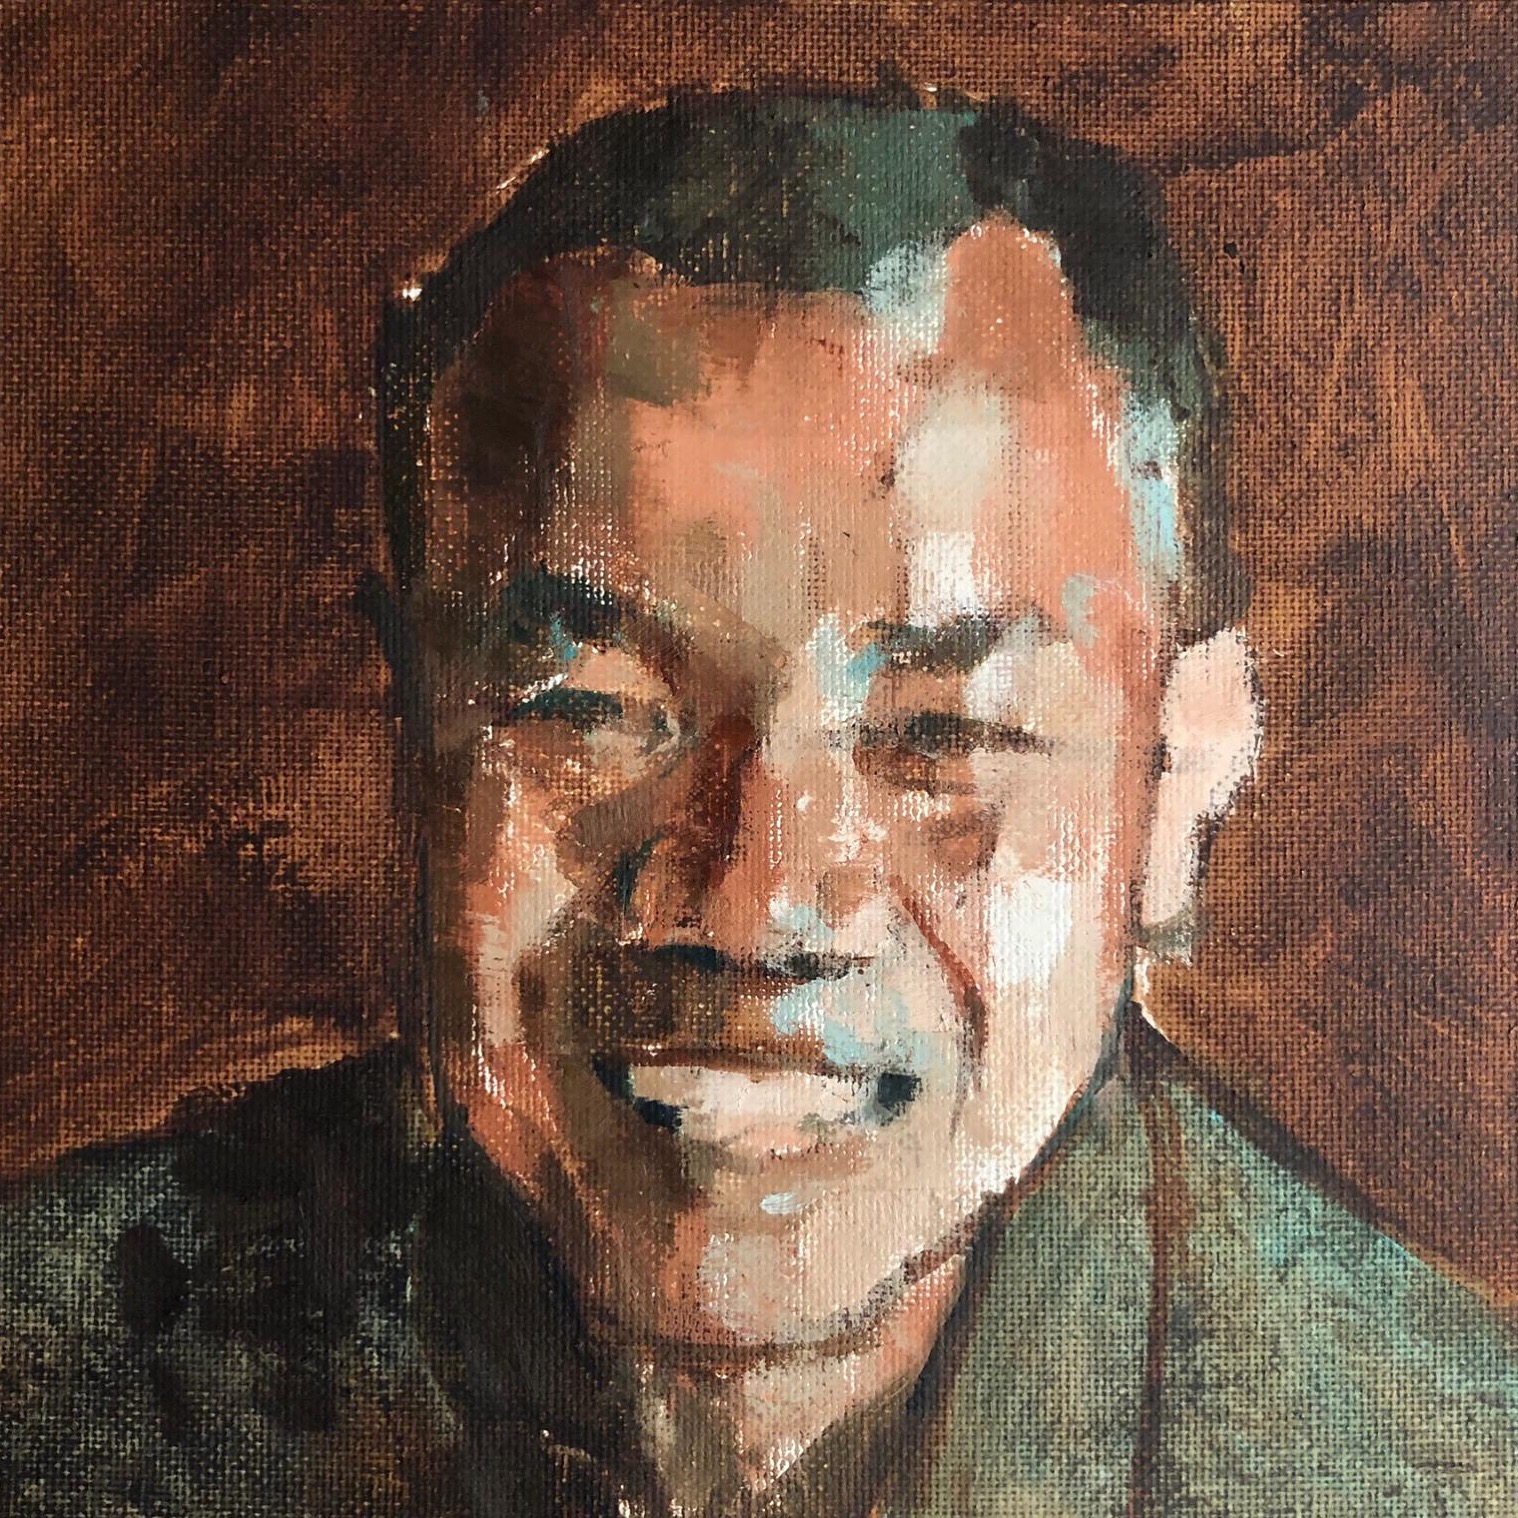 Dad, 2019 Jonathan Chan Oil on canvas, 8 x 8 in